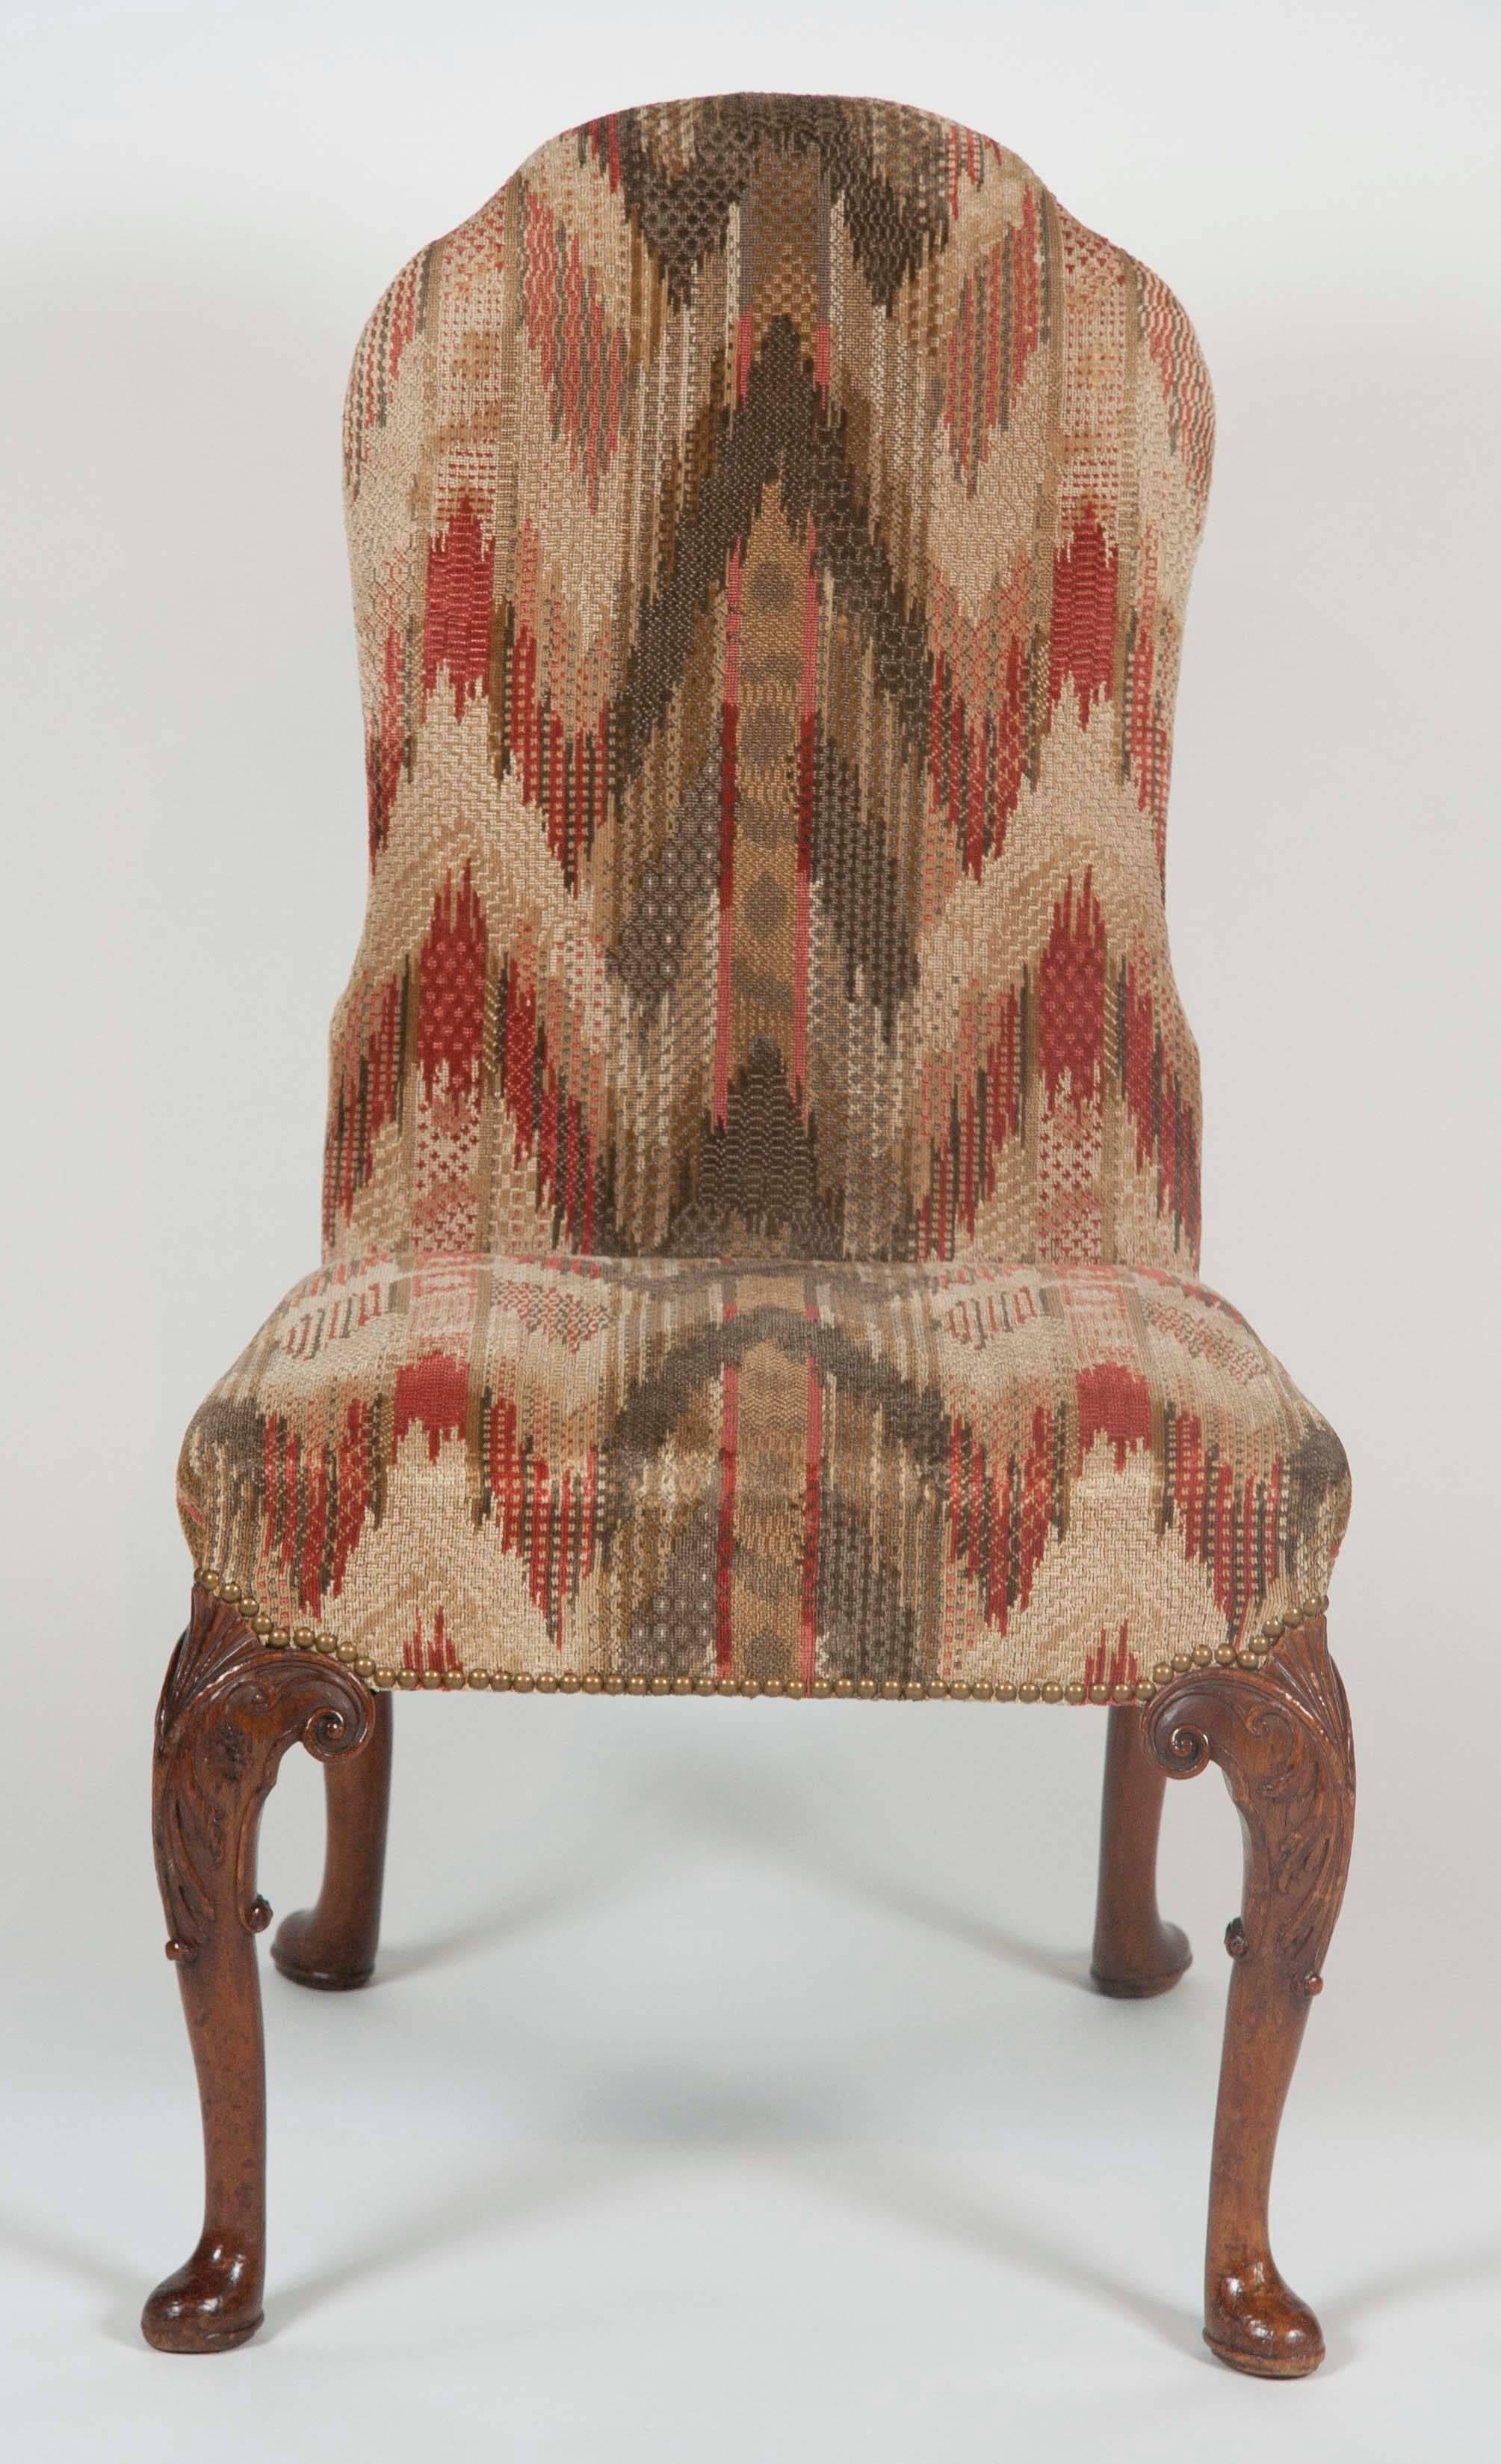 A set of six George II period dining chairs. Seat height: 18.5.